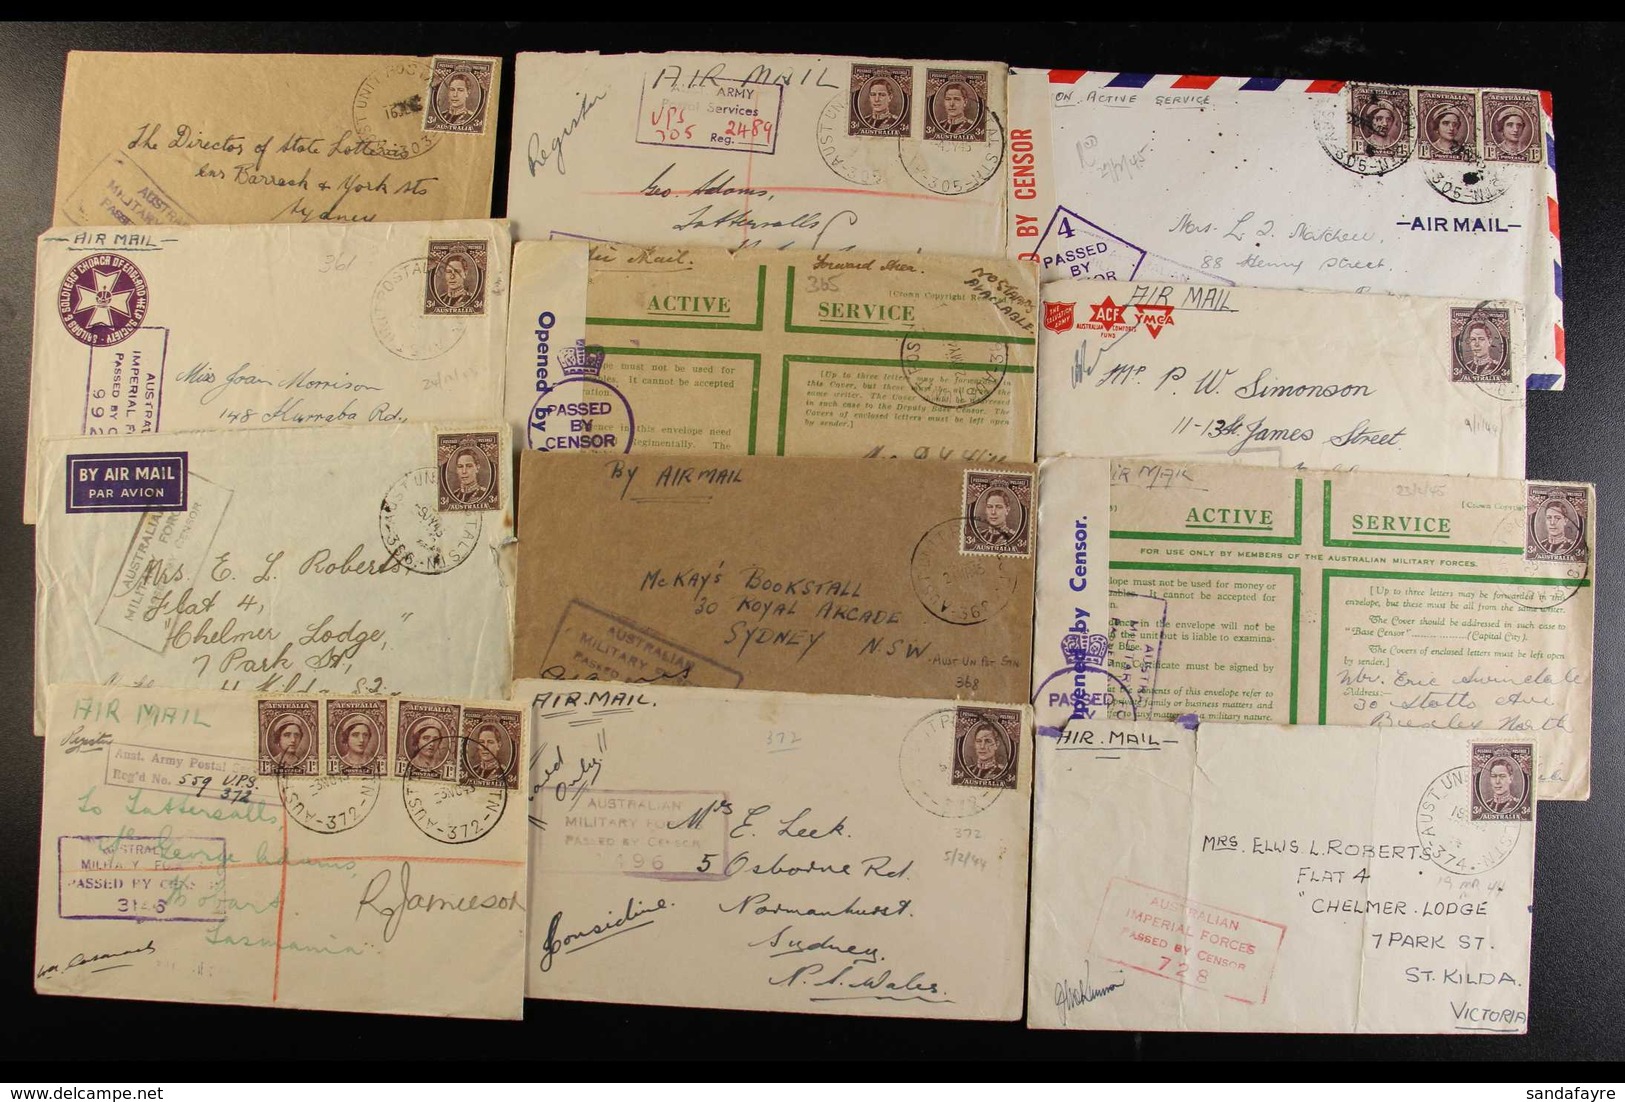 WW2 AUSTRALIAN FORCES - AUST UNIT POSTAL STN DATESTAMPS A Fine Collection Of Covers Back To Australia, Or One To NZ, Bea - Papúa Nueva Guinea